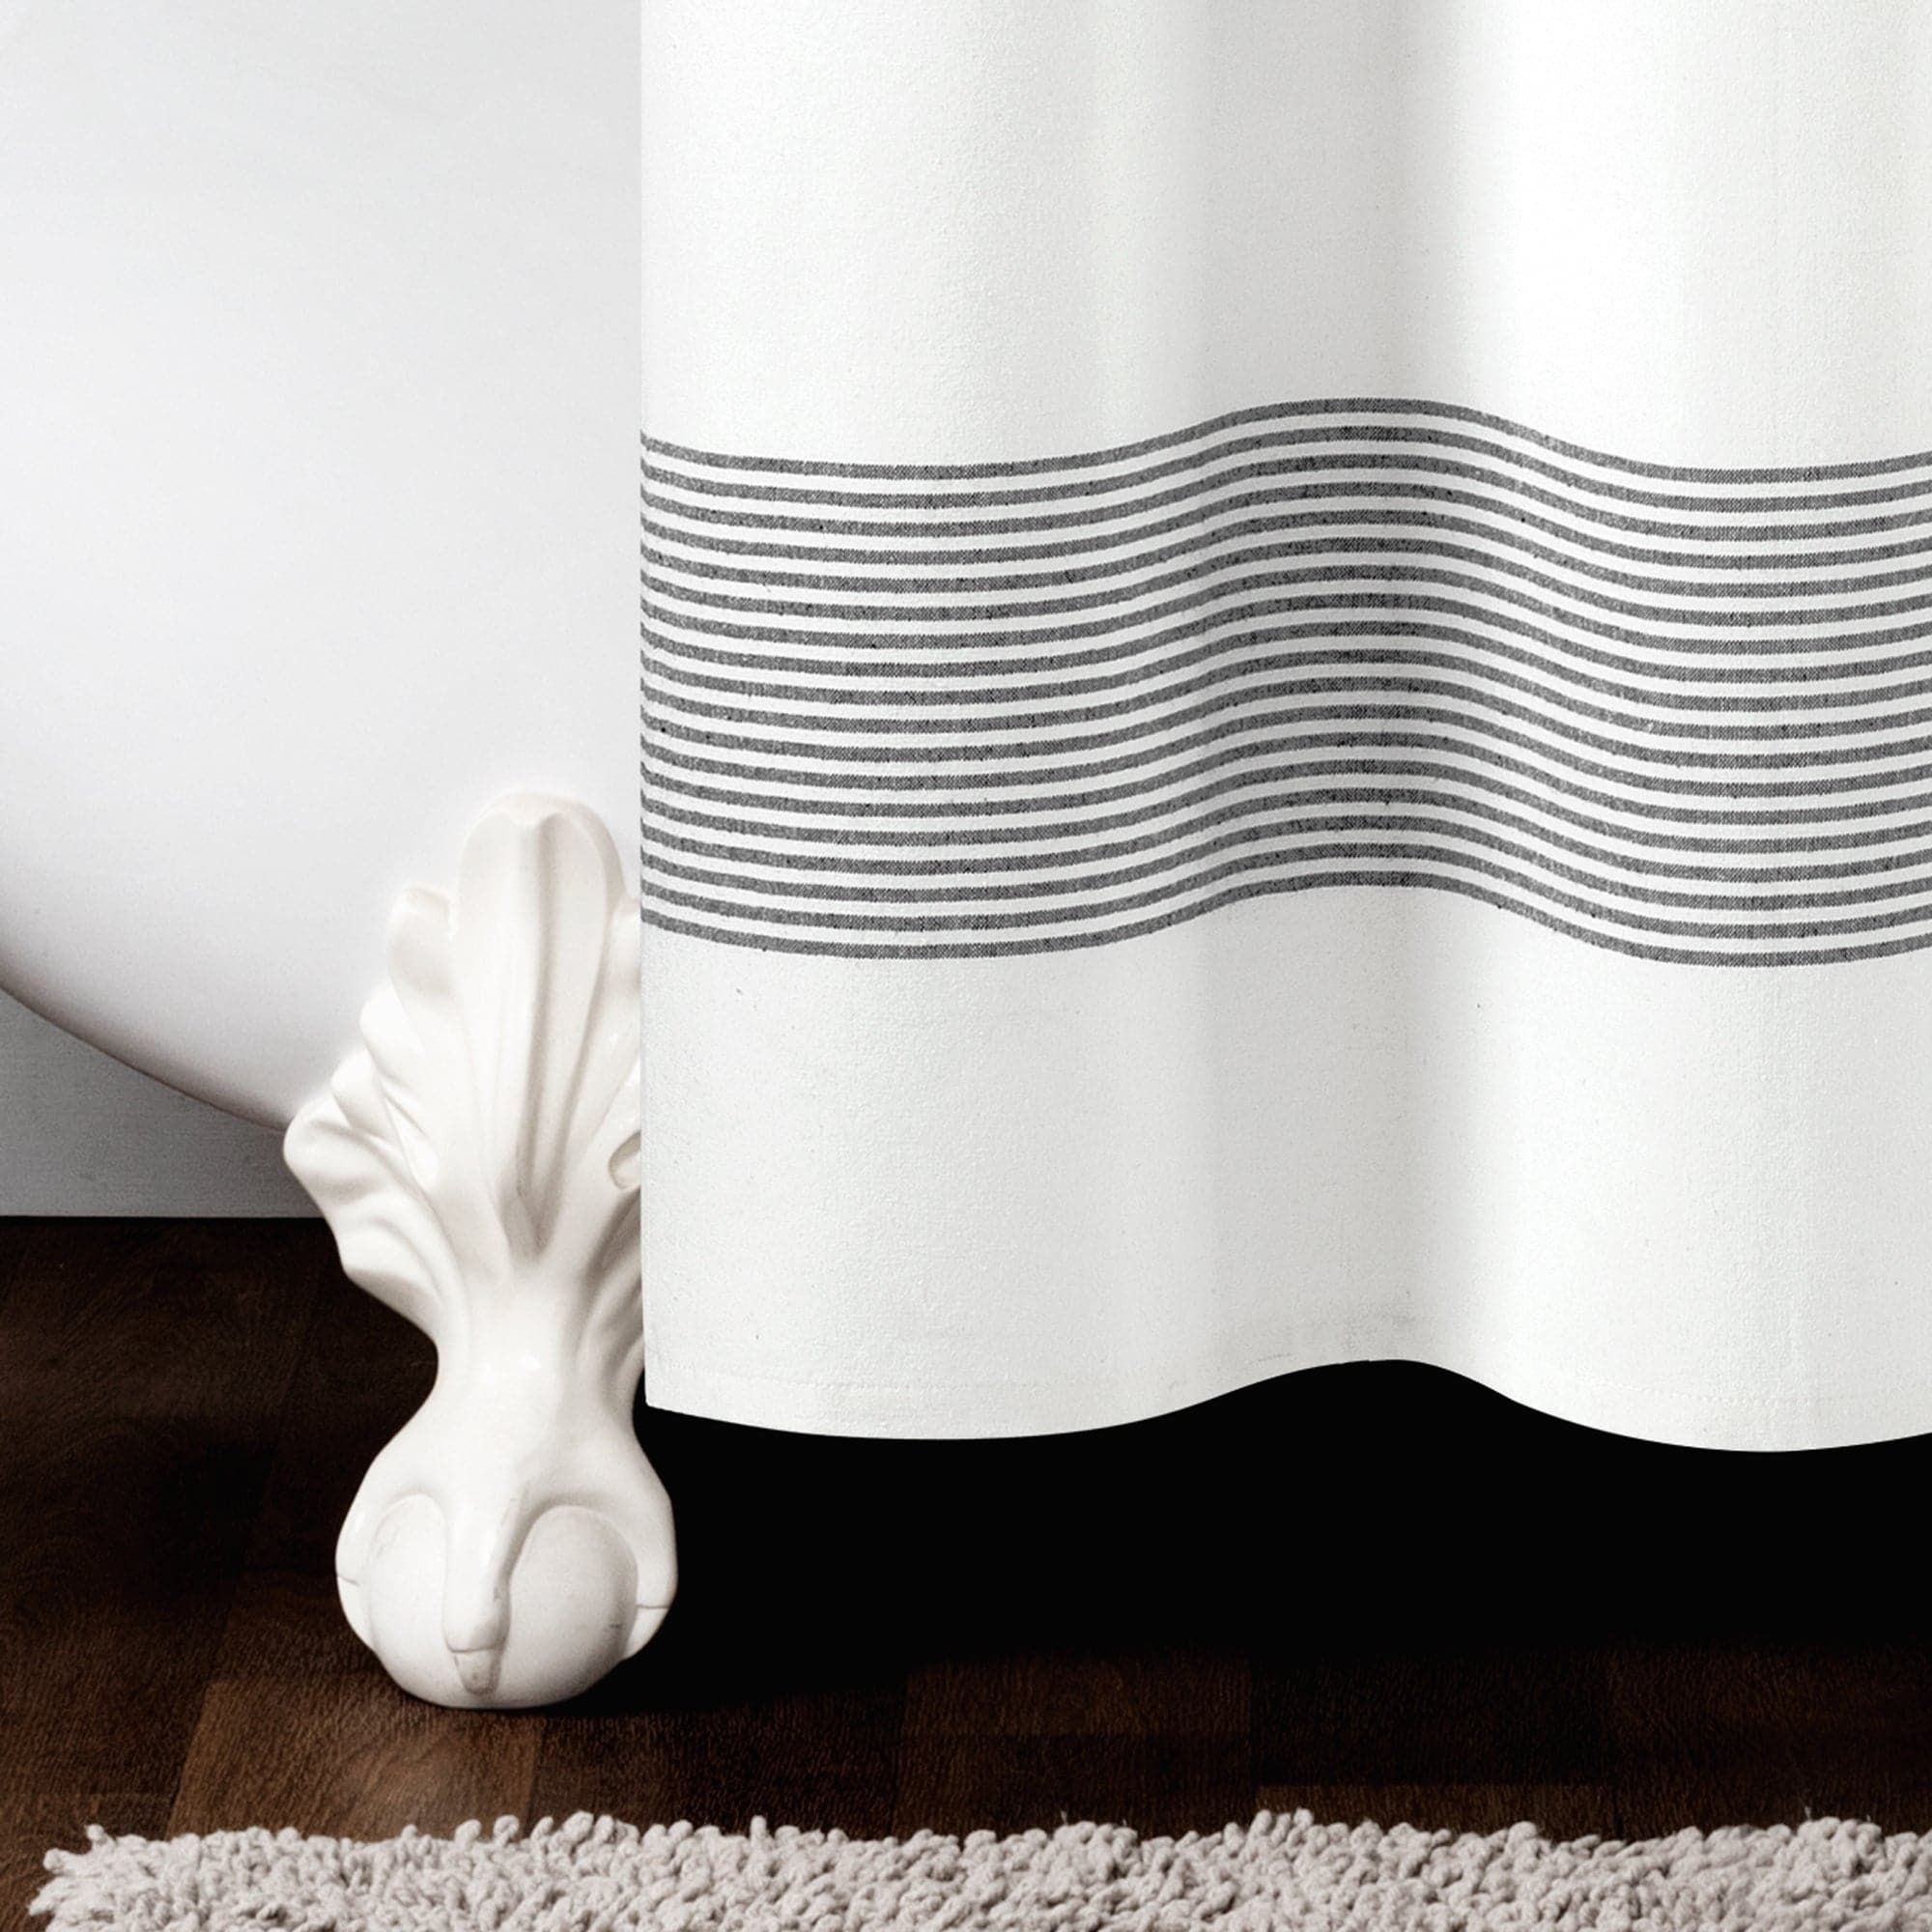 Timeless Elegance: The Appeal of Black and White Striped Shower Curtains